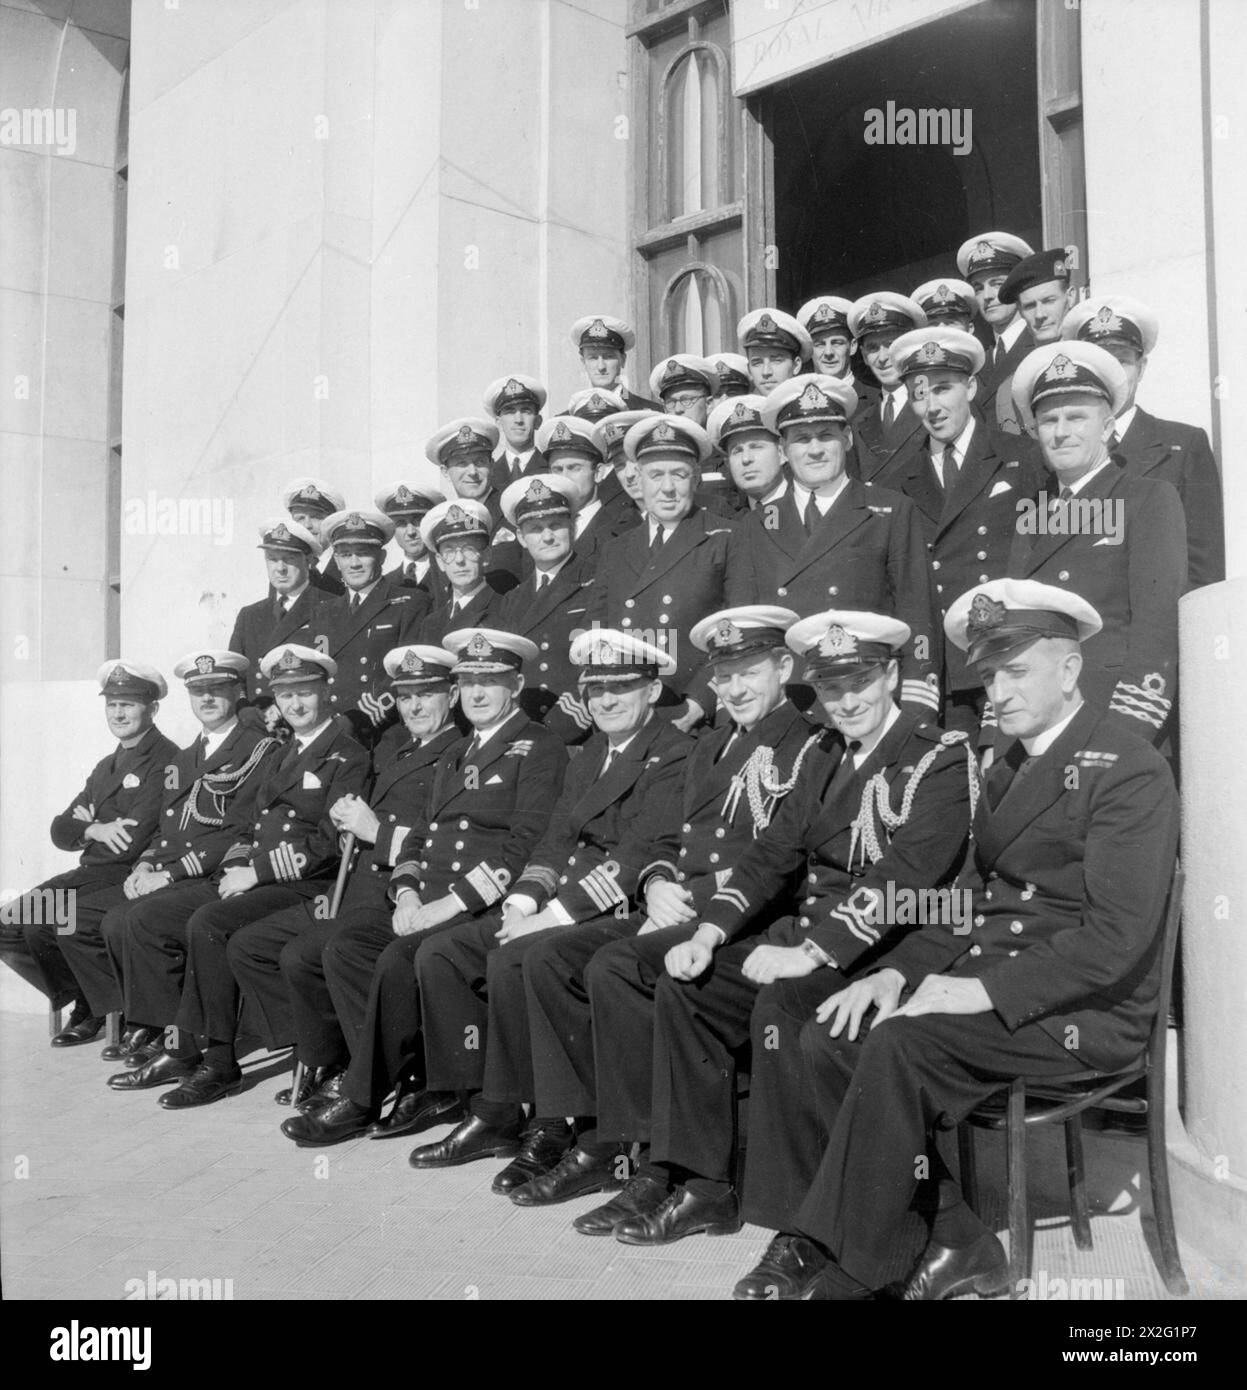 REAR ADMIRAL MORGAN AND HIS STAFF. DECEMBER 1944, TARANTO. REAR ADMIRAL C E MORGAN, DSO, FLAG OFFICER TARANTO AND ADRIATIC AND FOR LIAISON WITH THE ITALIANS, WITH HIS STAFF. - Left to right: First row: Chaplain W D Dinnis; Lieut Cdr L White, USN; Captain C H Duffett, DSO, RN; Commodore J Powell, DSO; Rear Admiral C E Morgan, DSO; Captain R I Money, RN; Lieut Cdr (S) G H L Kitson, RN; Lieut J W Kentish, RNVR; Chaplain W Devine, MC. Second row: Commander A Morrison, RN; Commander A G Orr-Ewing, RNVR; Commander R F Nagle, RNVR; Commander T H Trueman, RNVR; Commander R B Bodily, RN; Commander (E) Stock Photo